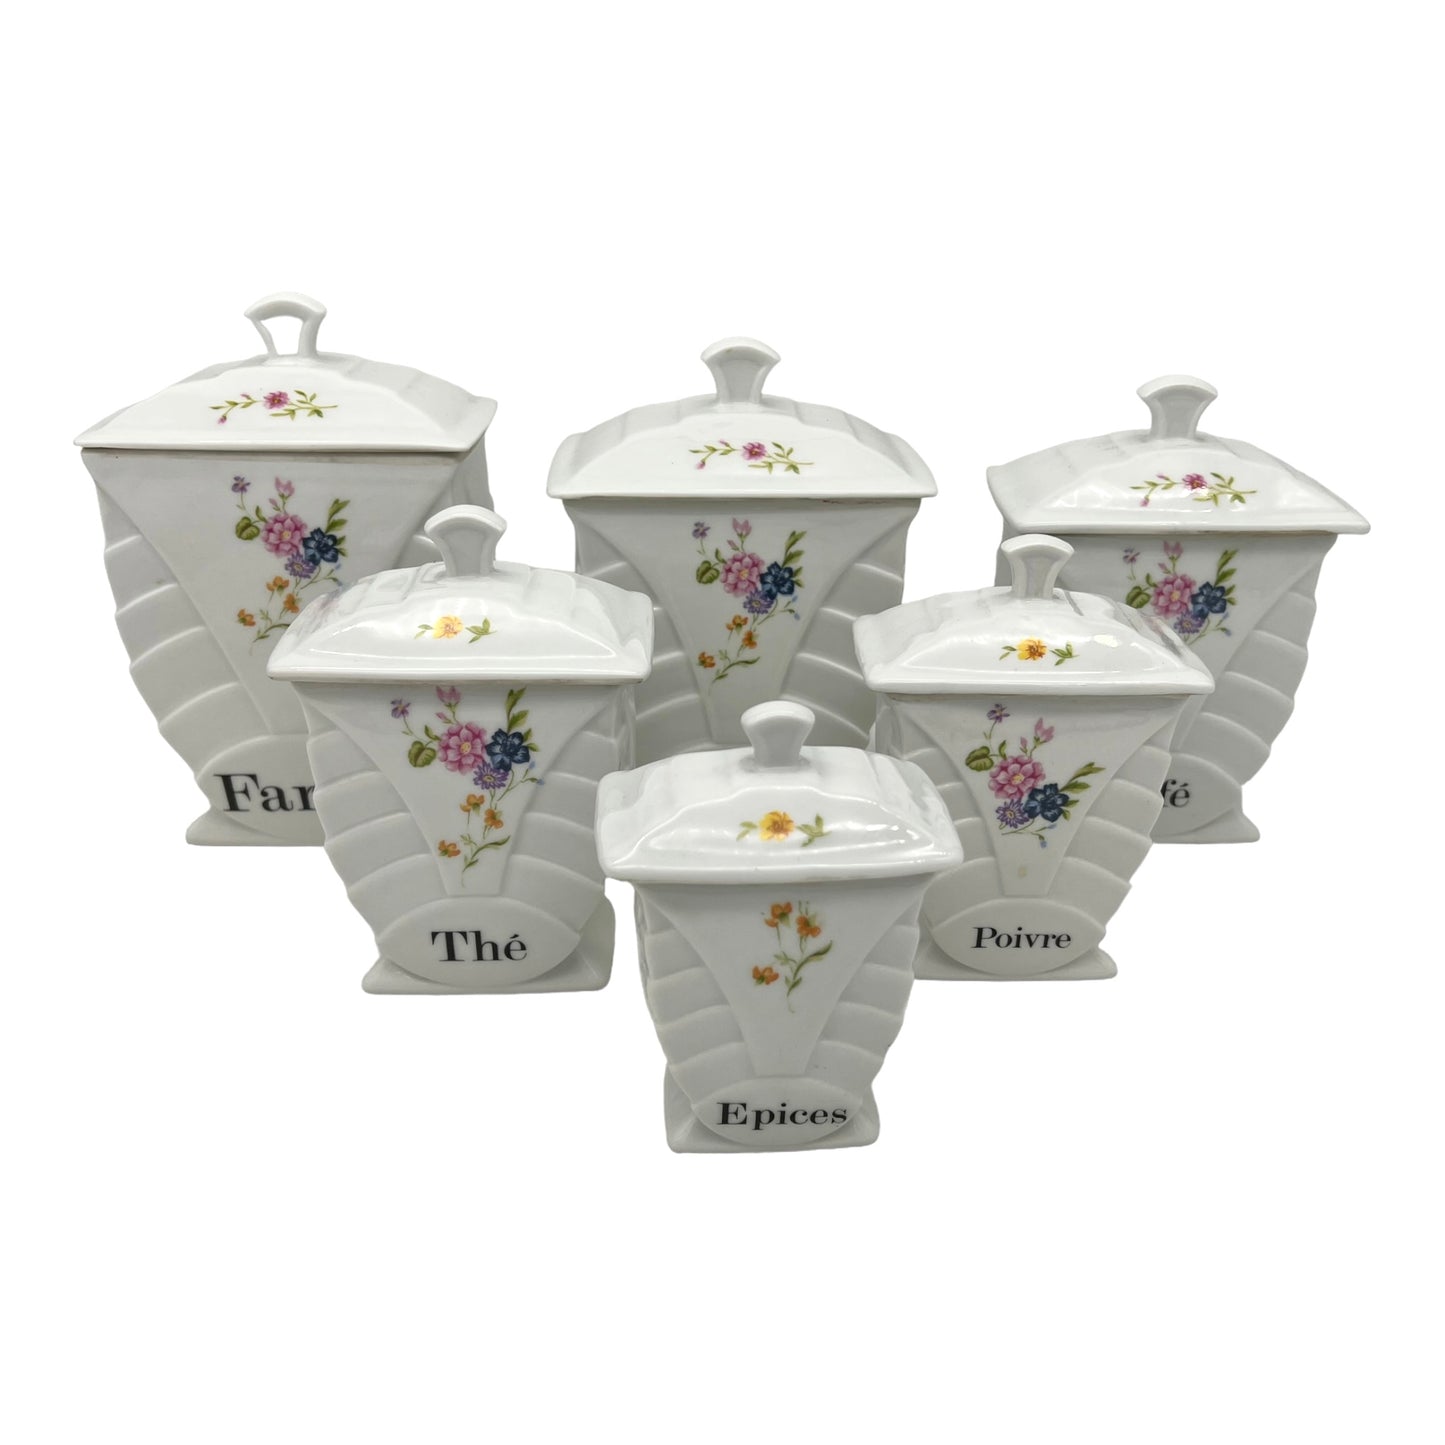 image 2 French vintage porcelain canisters sold by All Things French Store